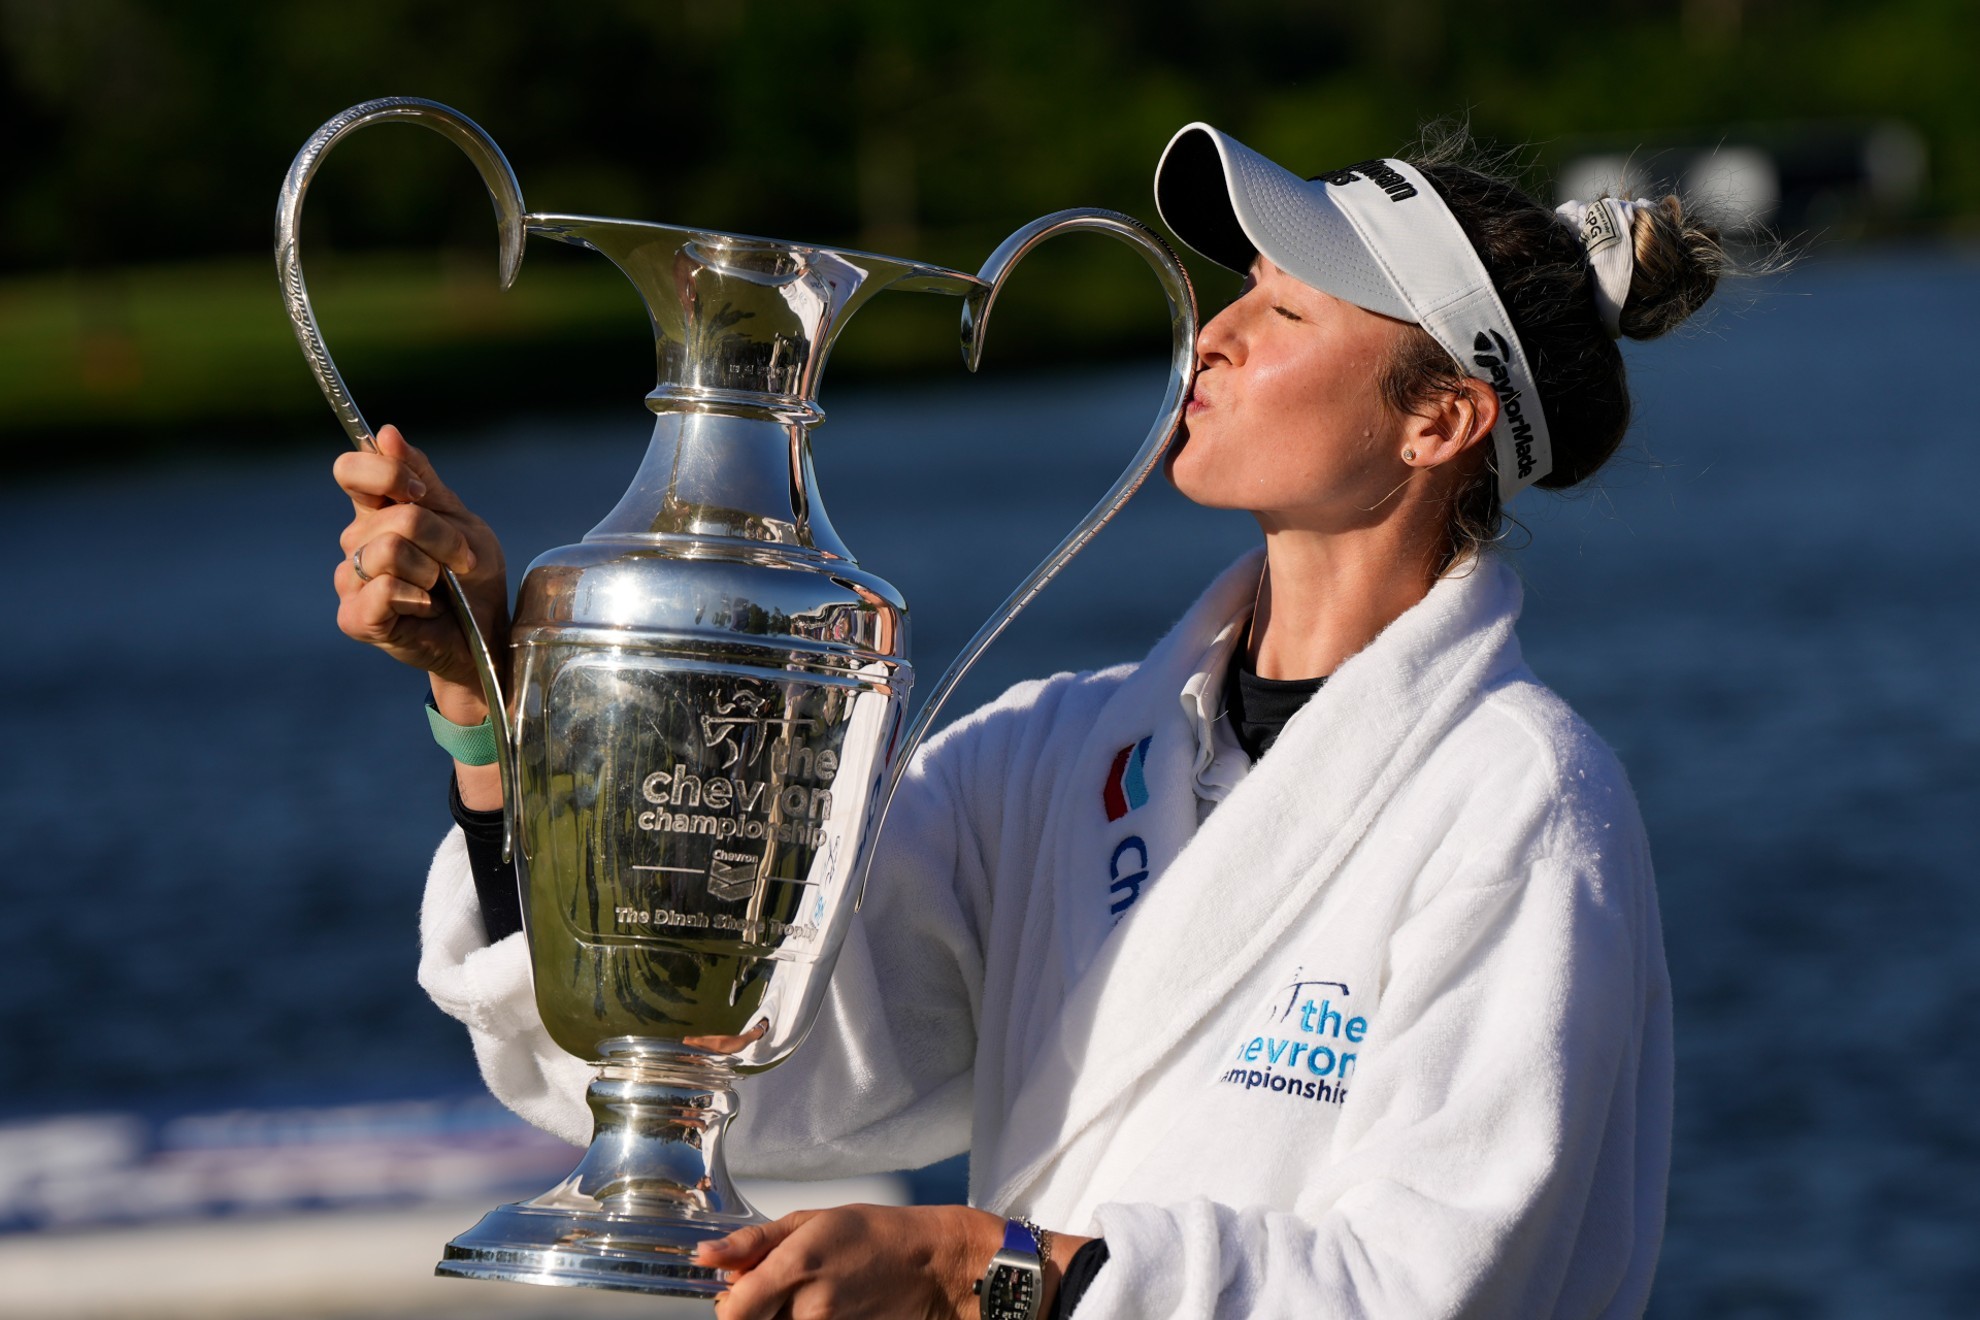 Nelly Korda ties LPGA Tour record with 5th straight victory, wins Chevron Championship for 2nd major